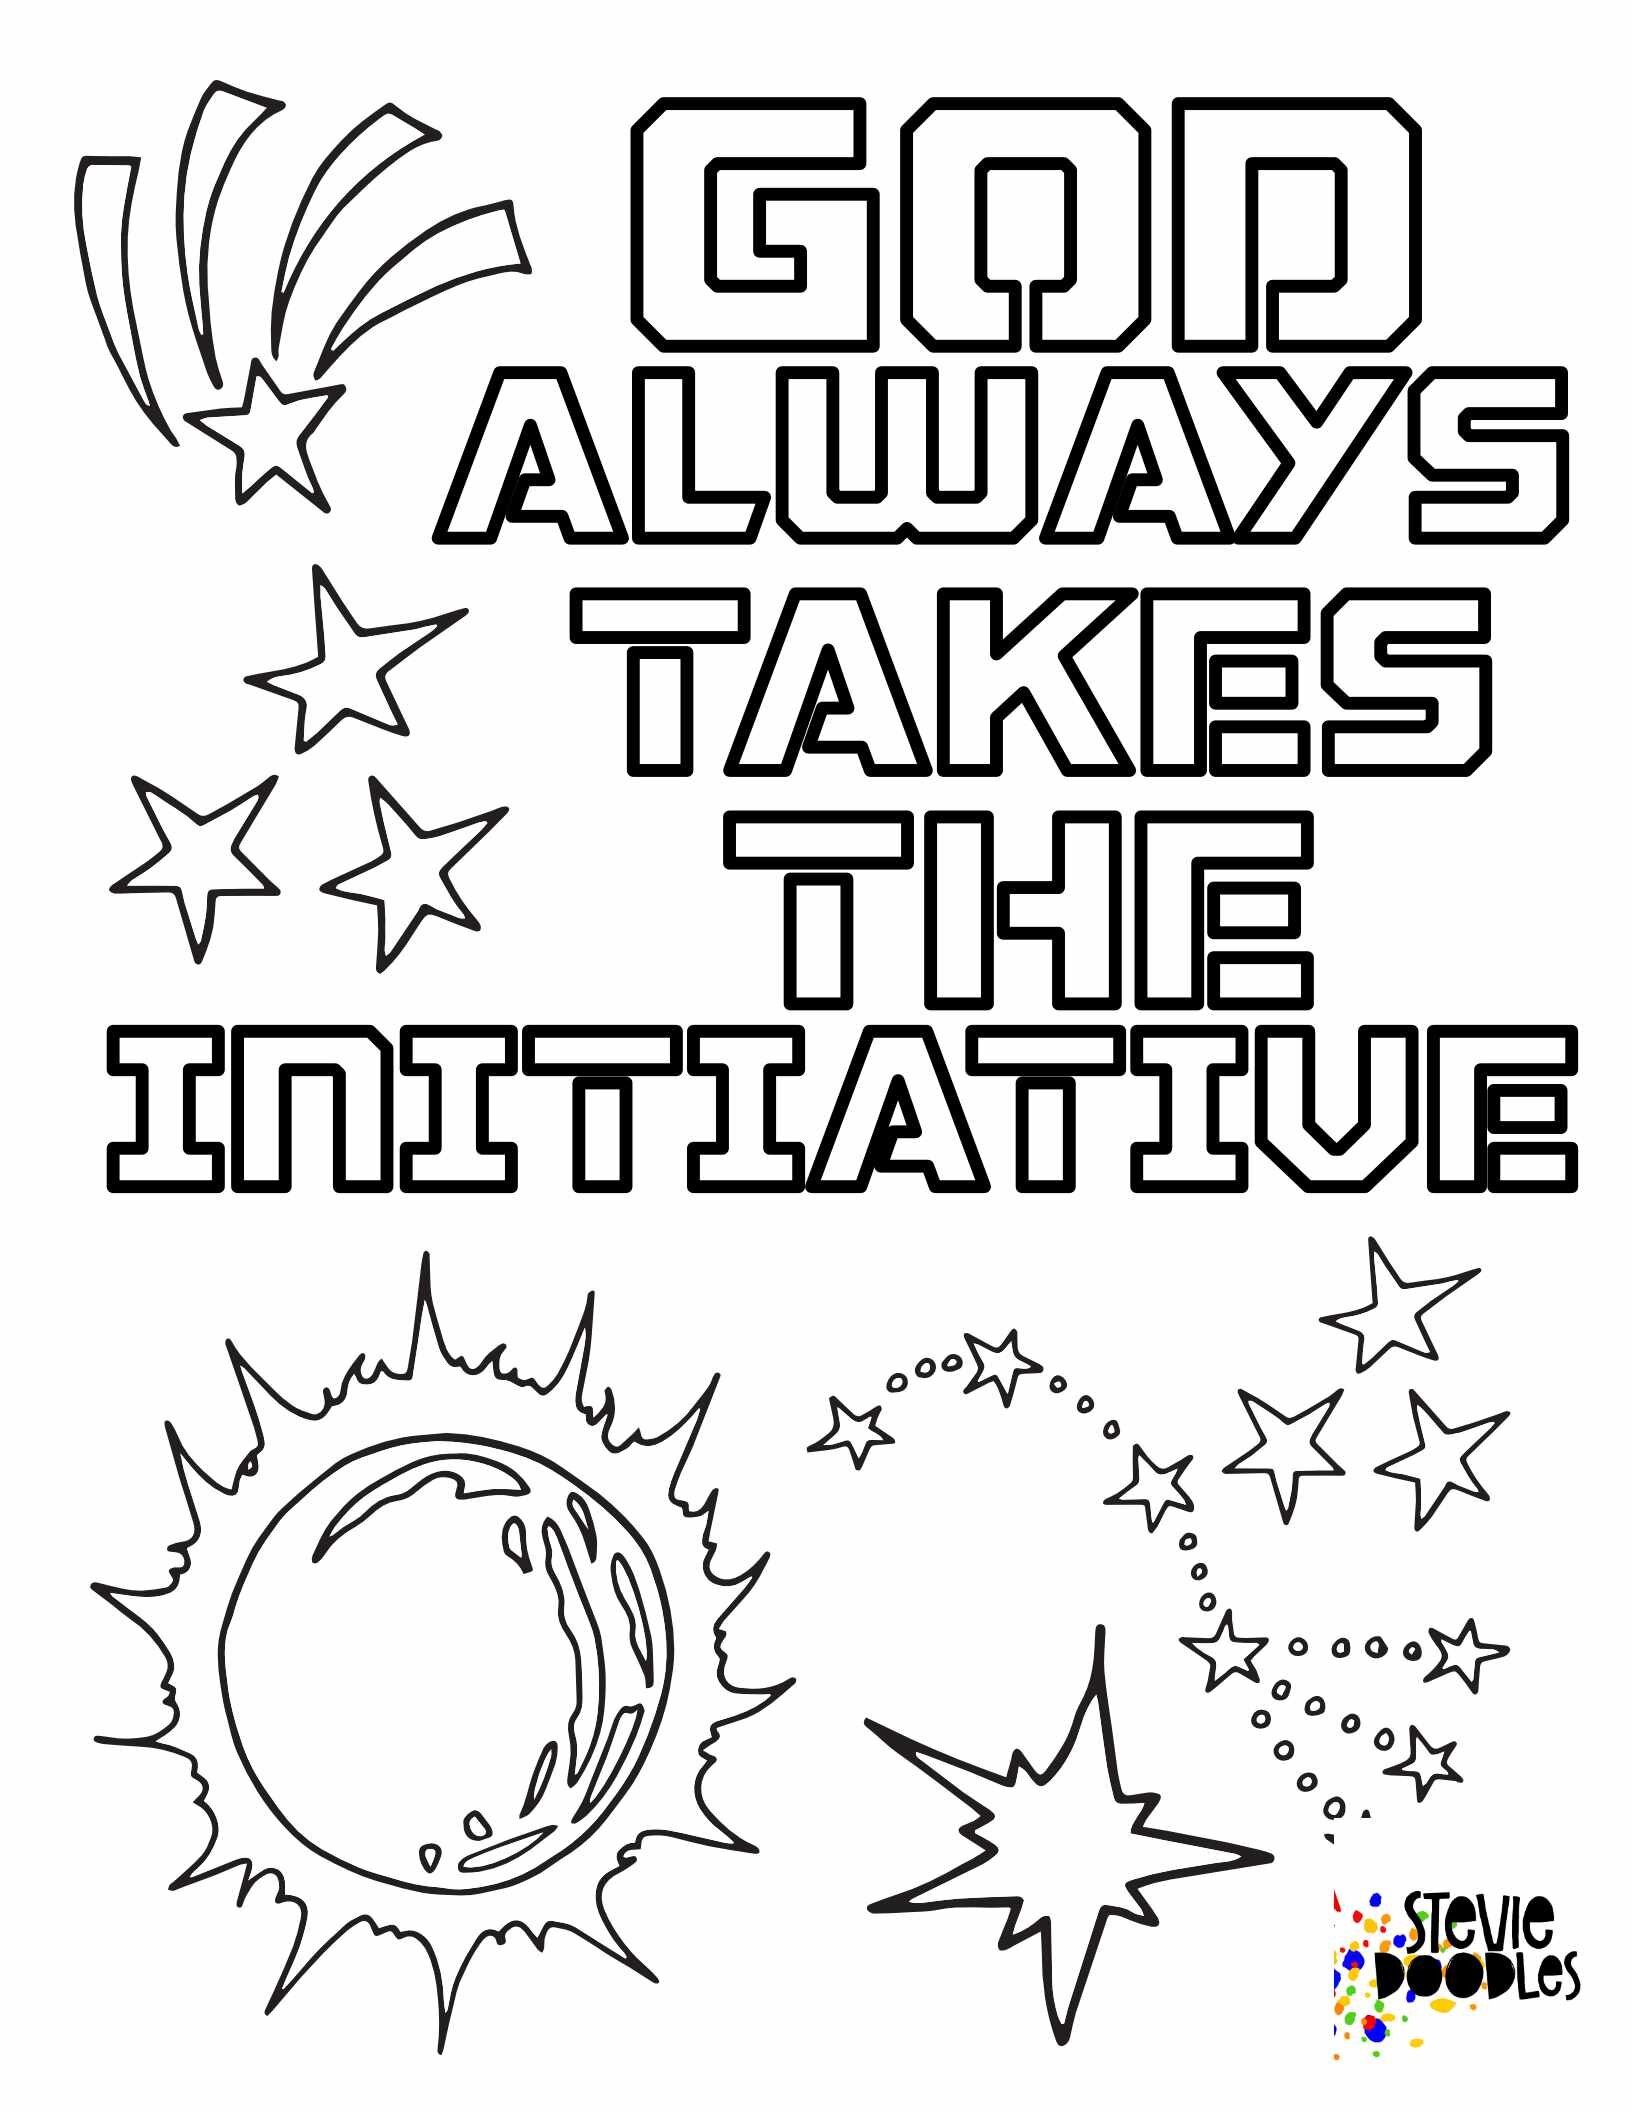 God always takes the initiative3 free coloring pages inspired by the Experiencing God bible study Over 1000 free coloring pages at Stevie Doodles